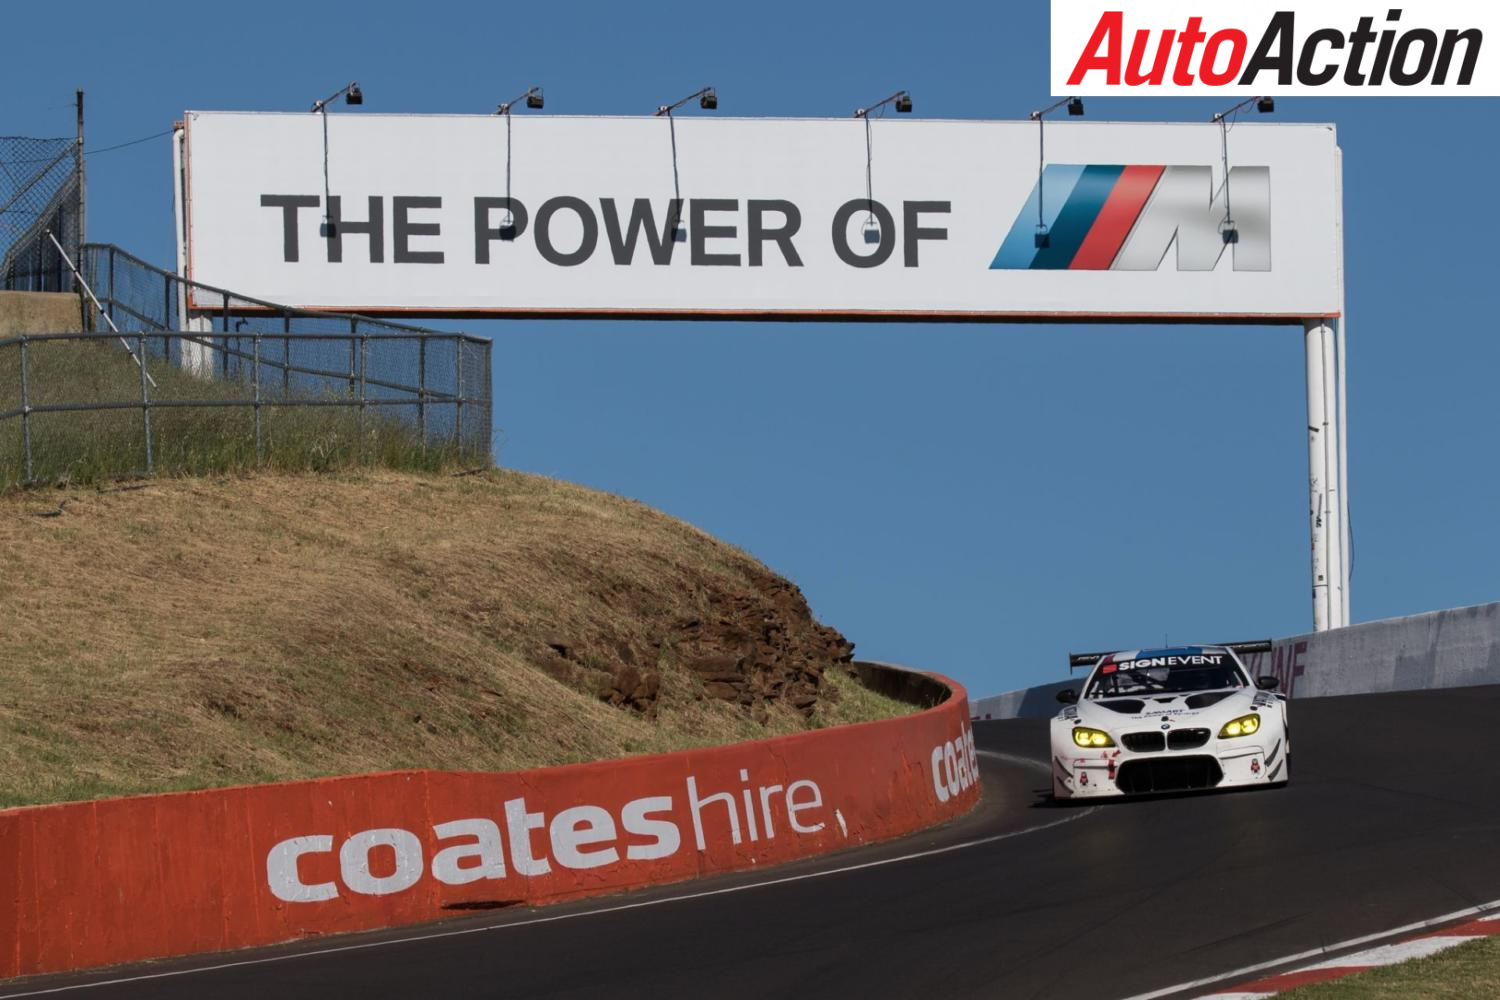 BMW used Challenge Bathurst in 2016 in preparation for the Bathurst 12 Hour - Photo: Rhys Vandersyde